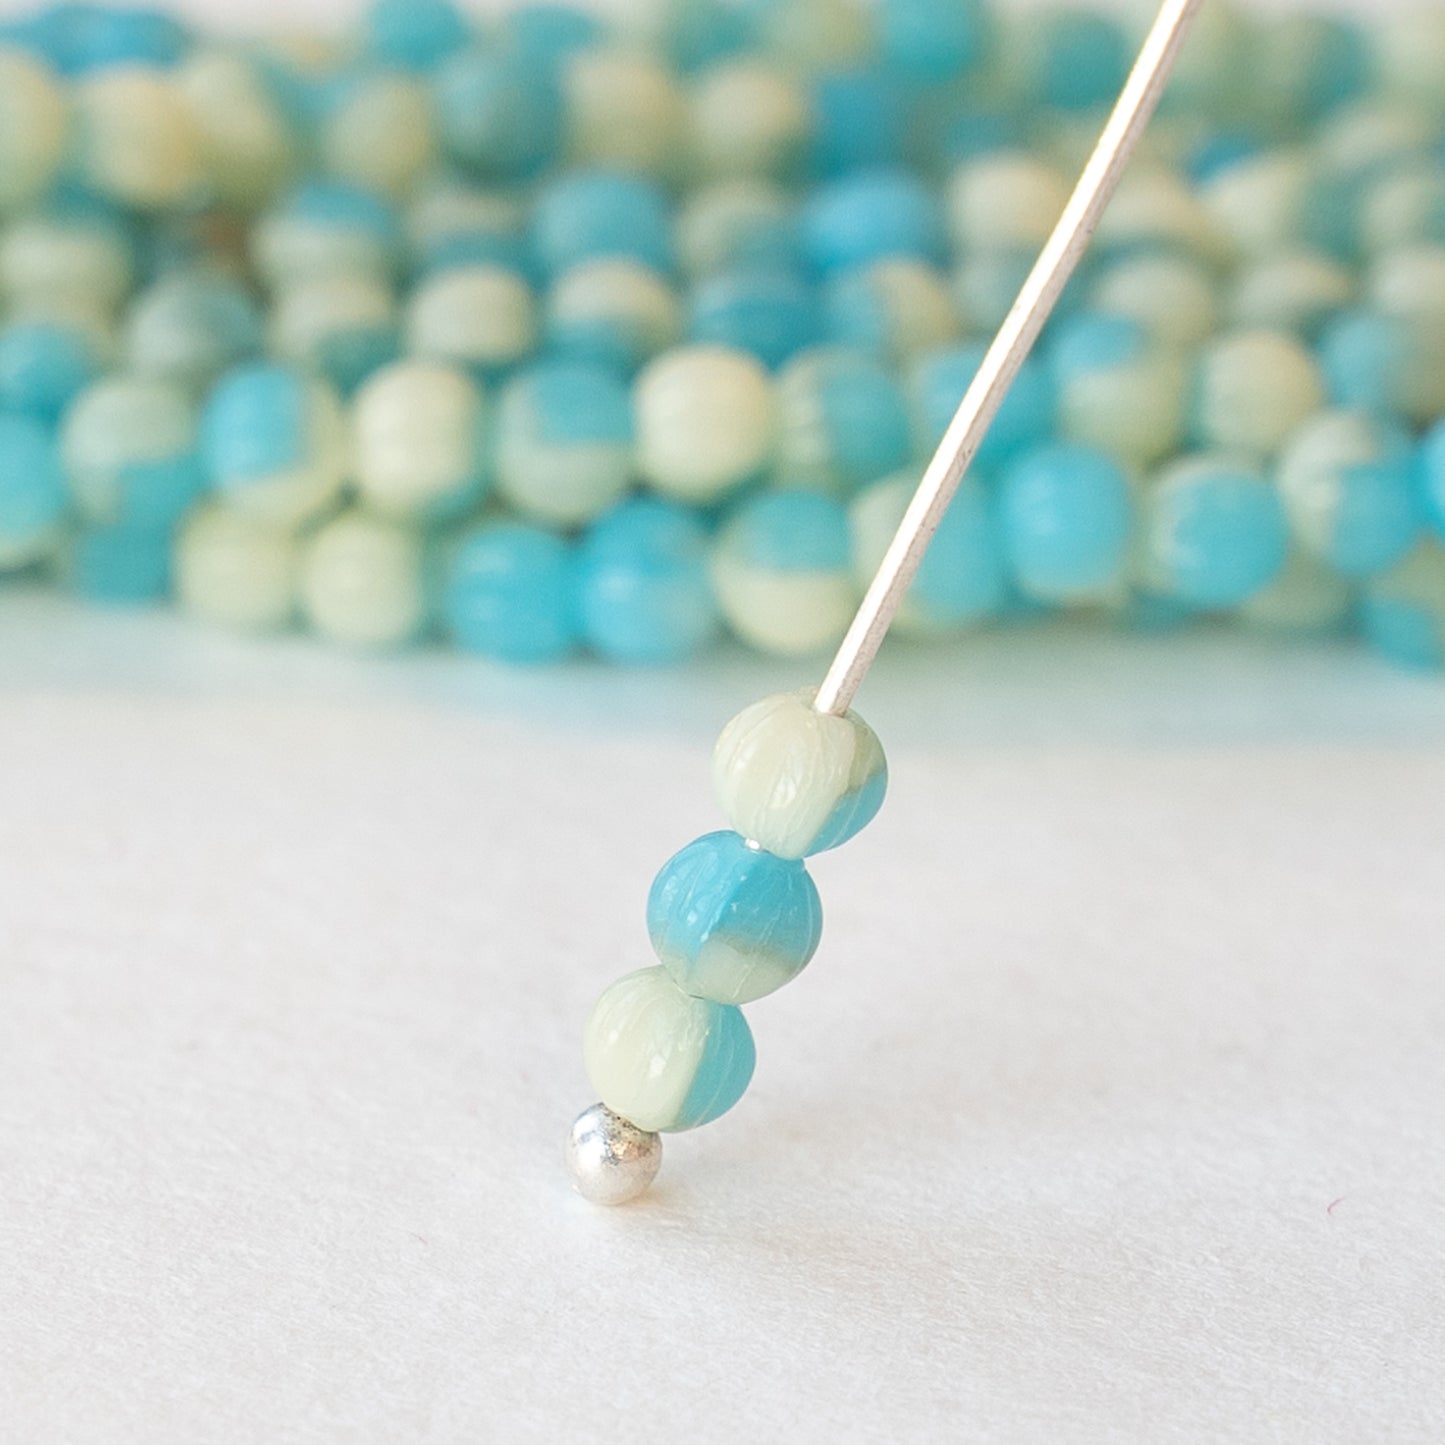 Load image into Gallery viewer, 3mm Melon Bead - Ivory and Aqua  - 100 beads
